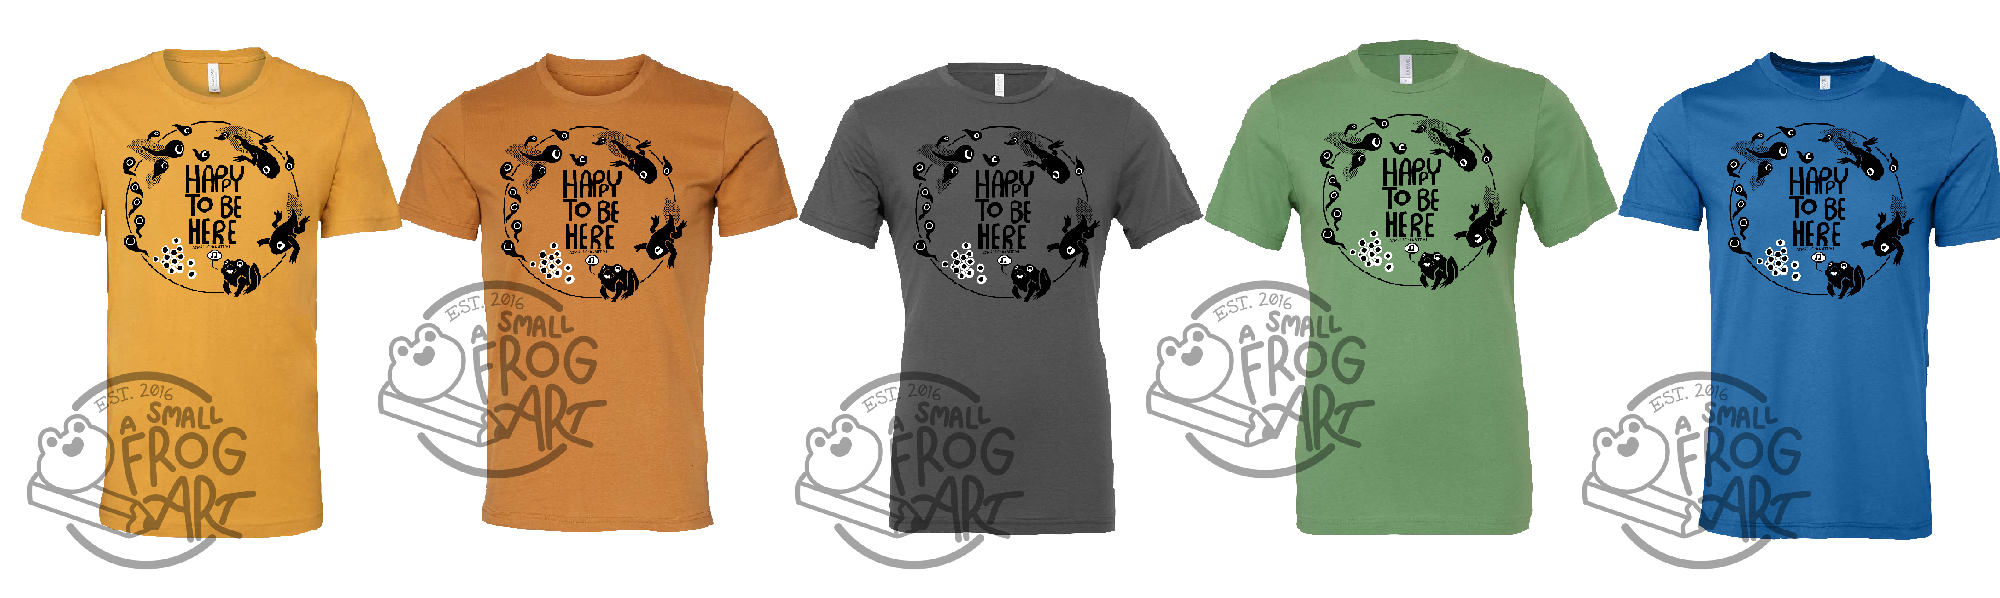 A line-up of the design on five different shirt colors: yellow, brown, grey, green, and blue